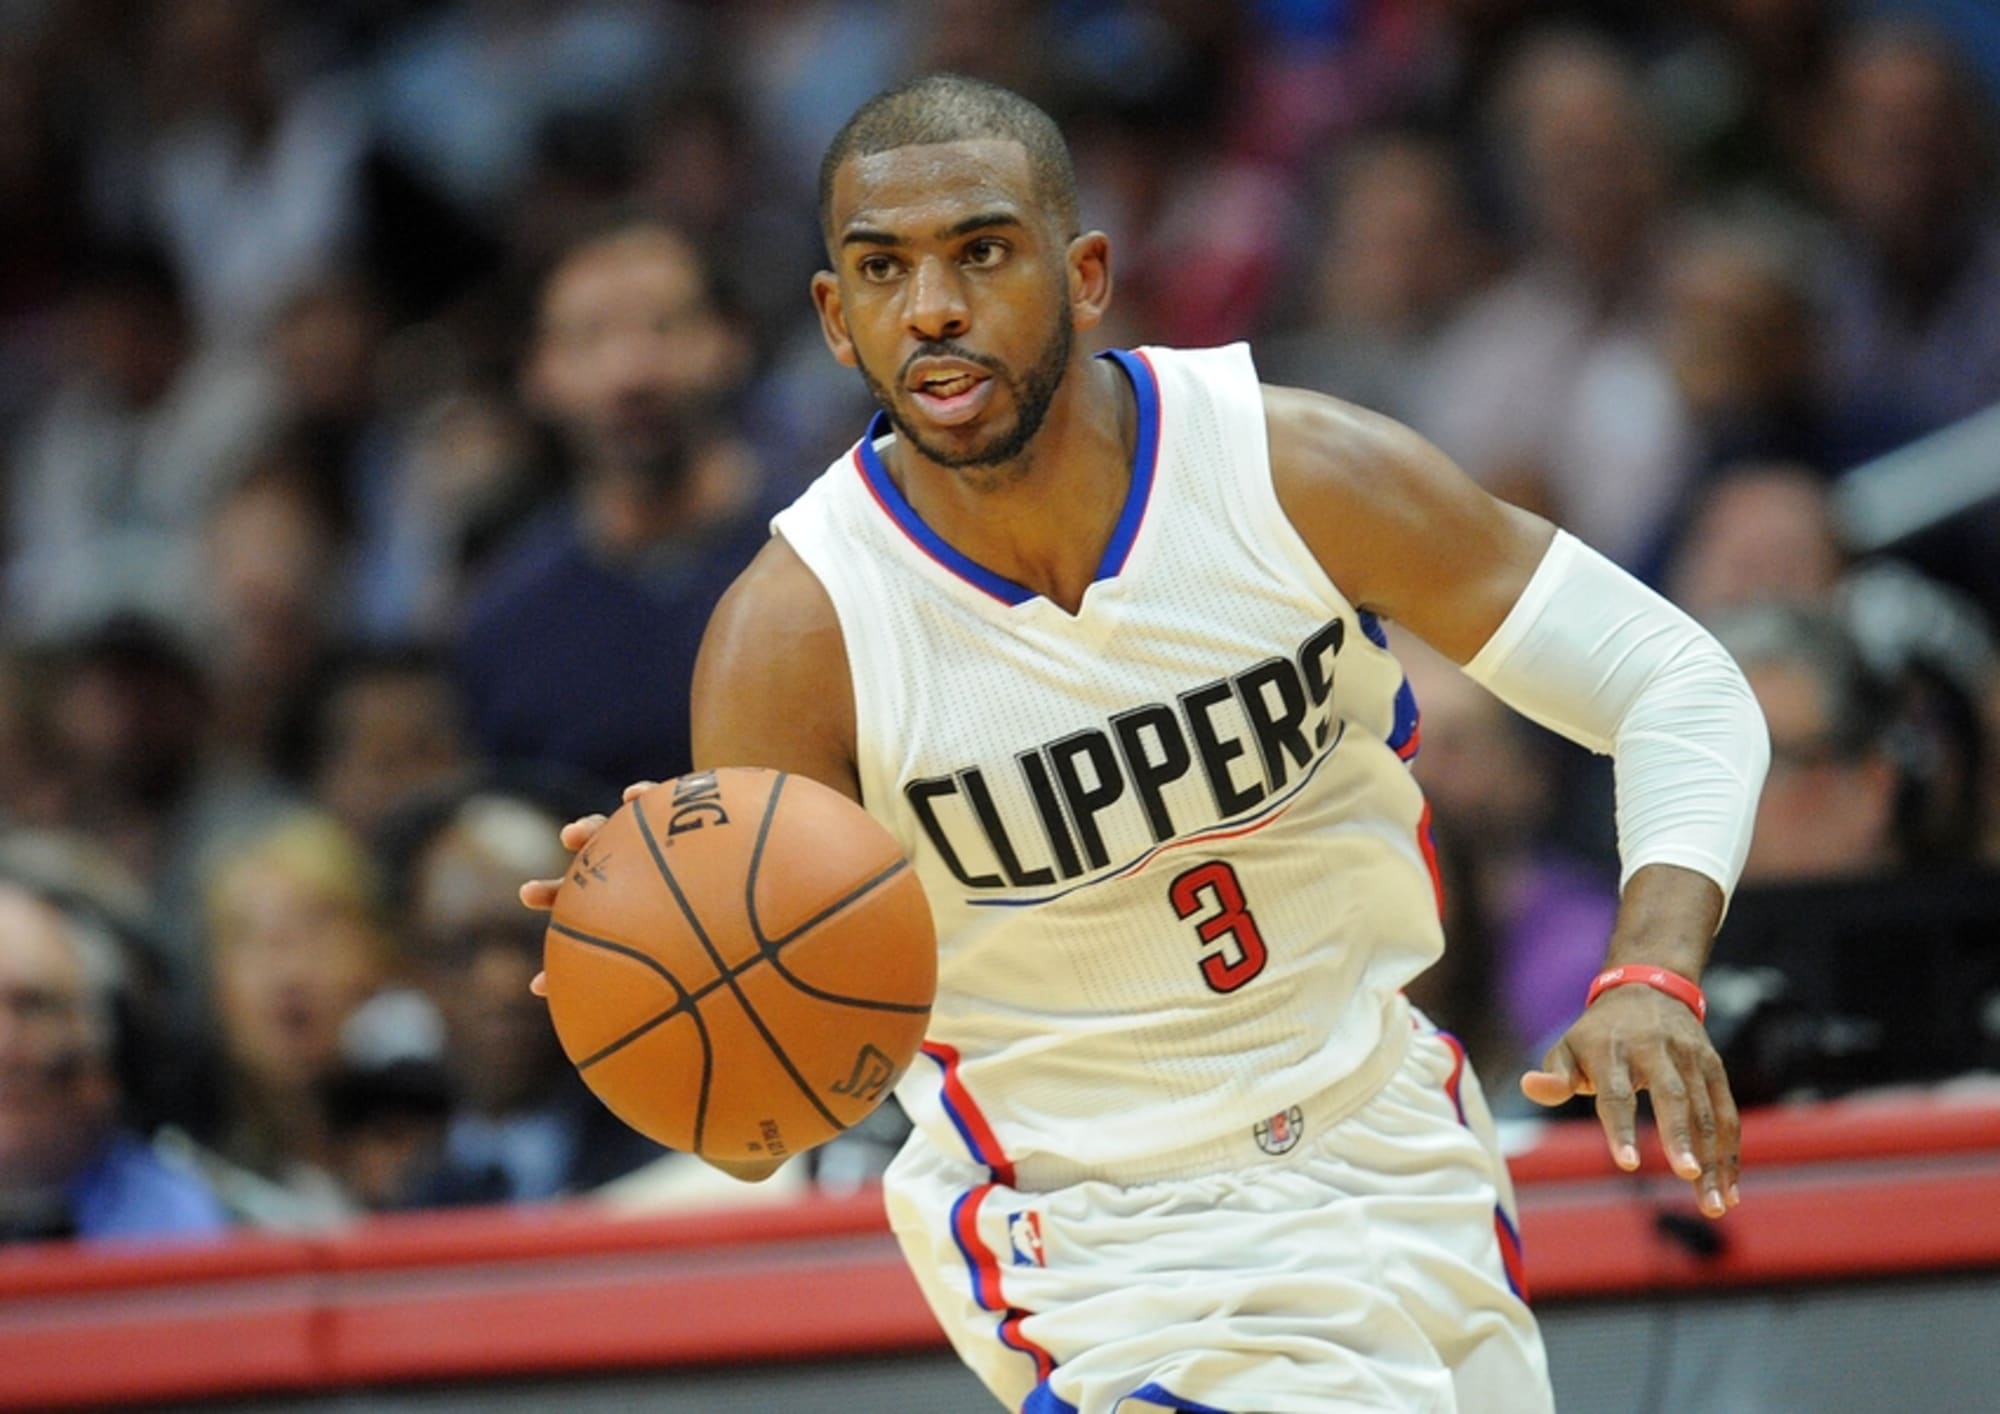 LA Clippers' Chris Paul is playing like he's in his prime